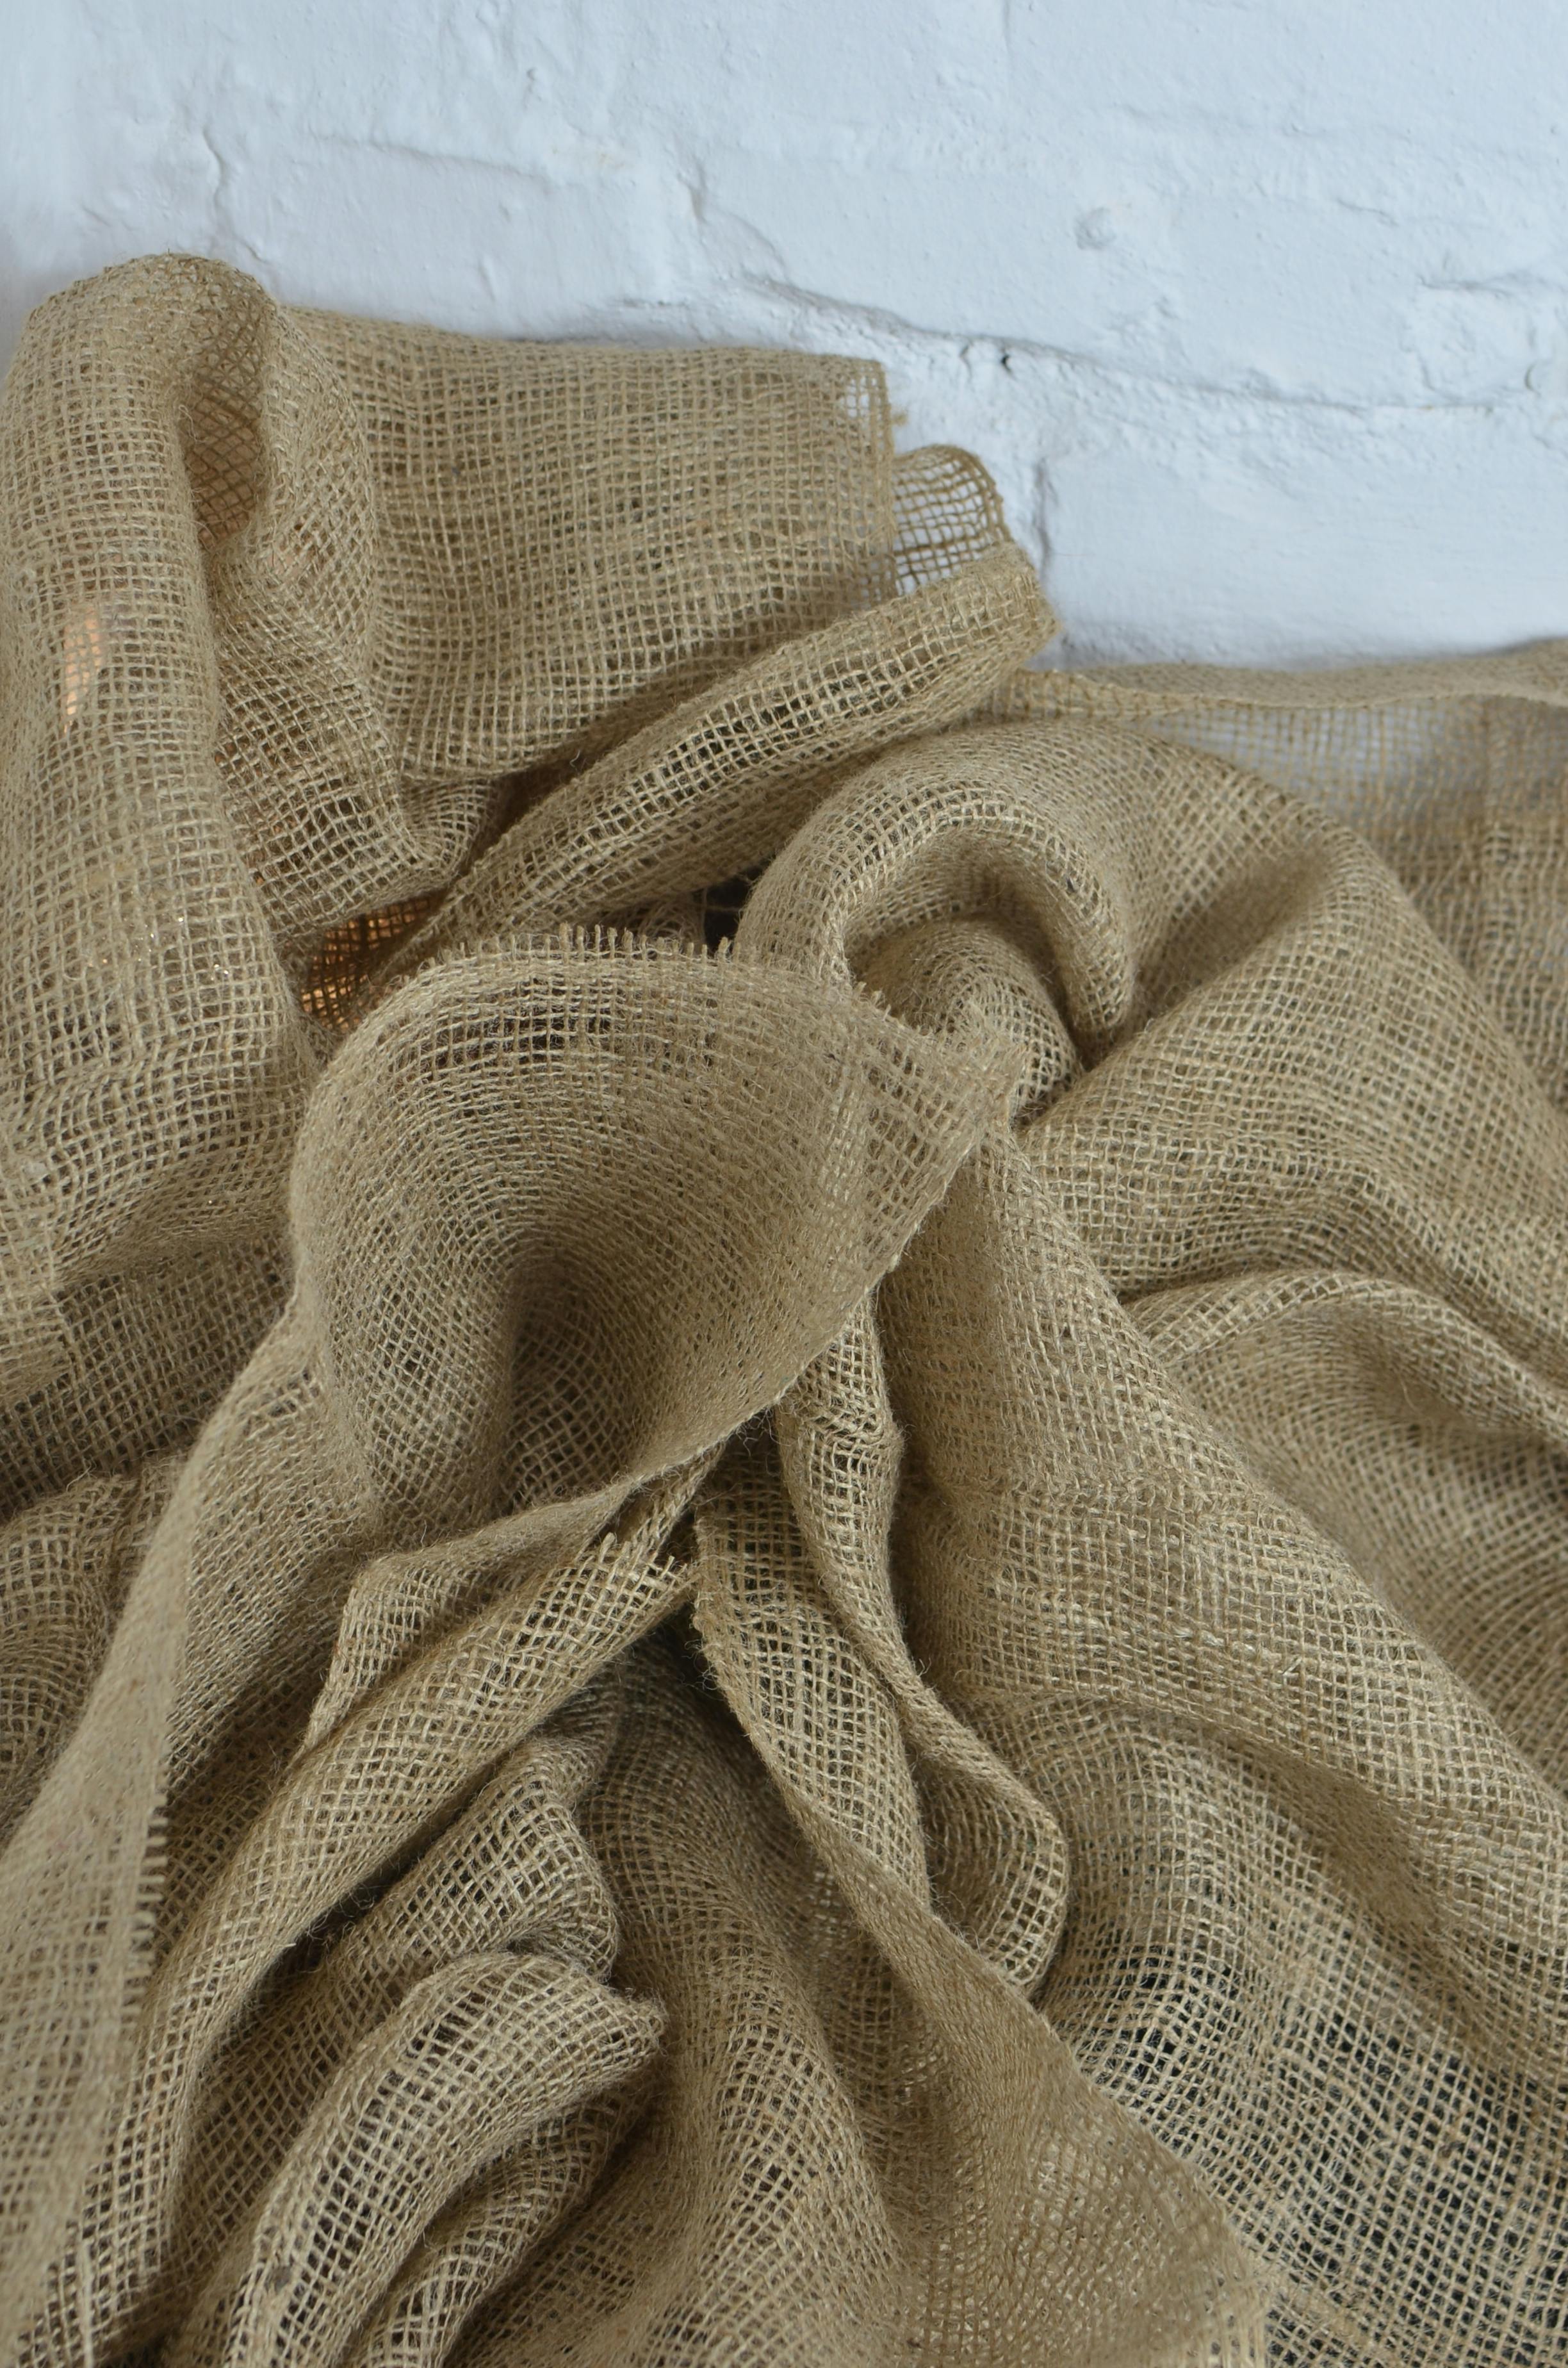 543,621 Burlap Royalty-Free Images, Stock Photos & Pictures